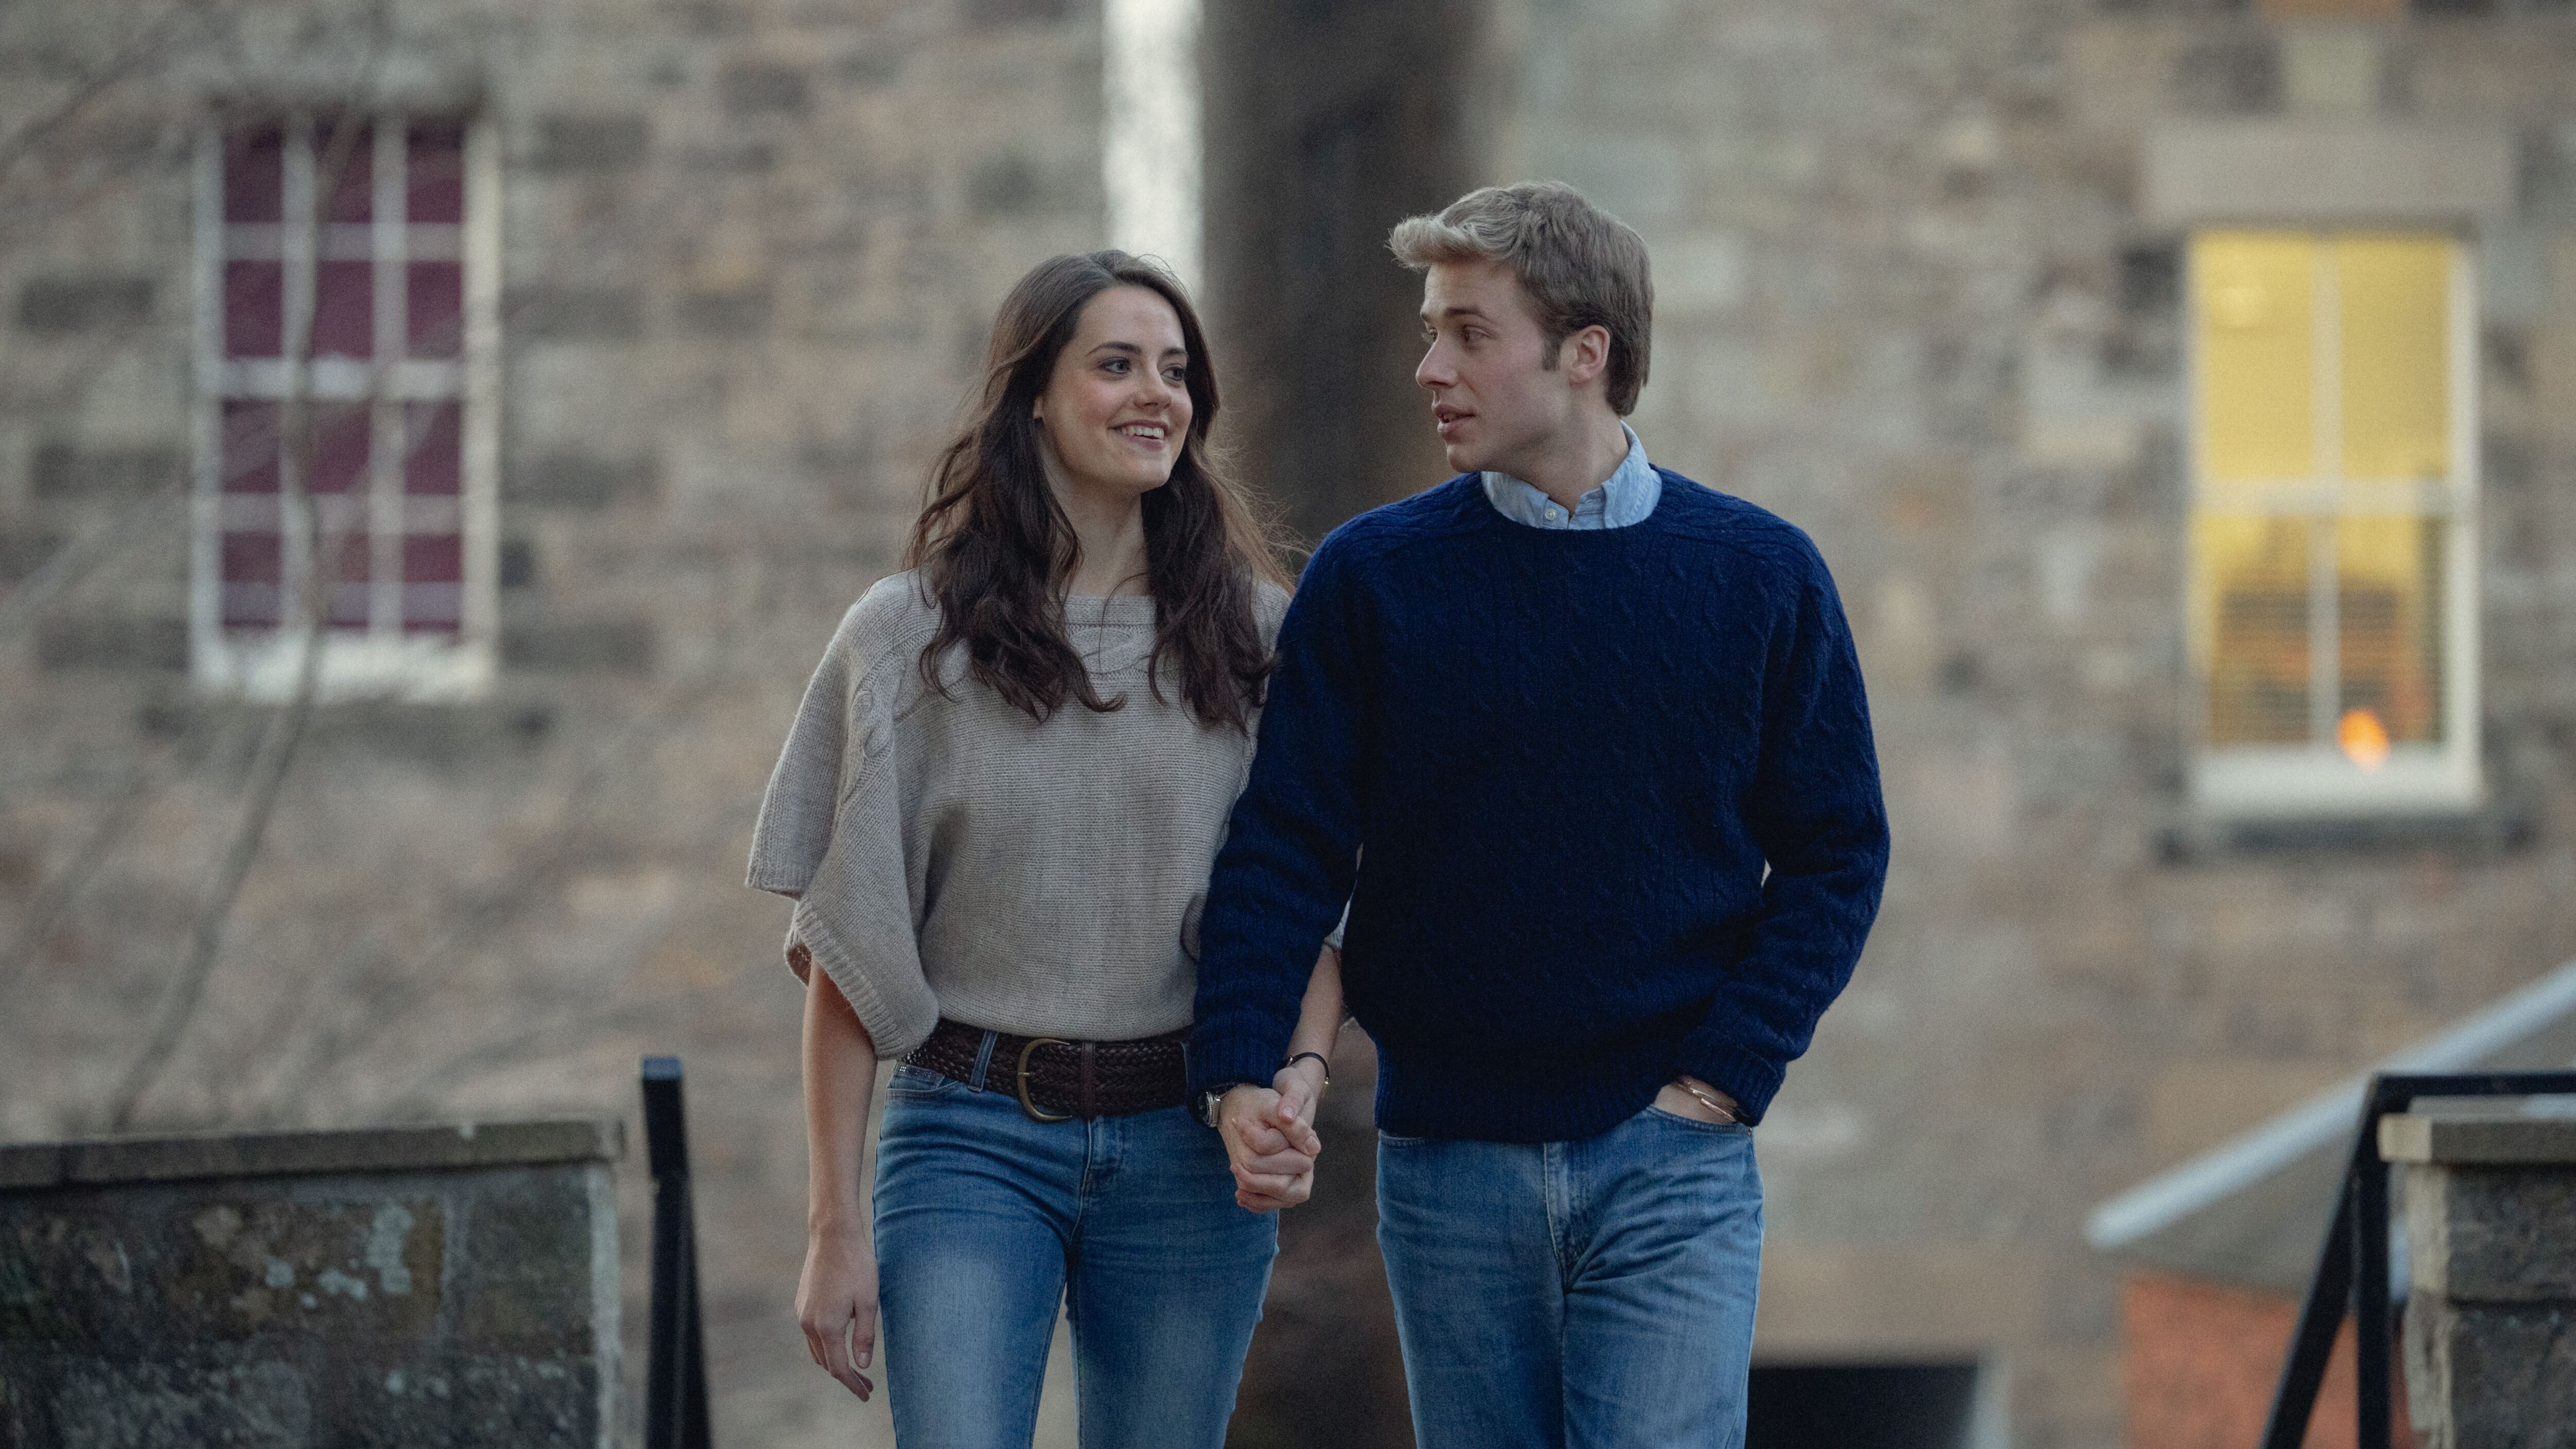 The actors filmed scenes in St Andrews earlier this year, including at locations the couple reportedly used to go to 20 years ago.